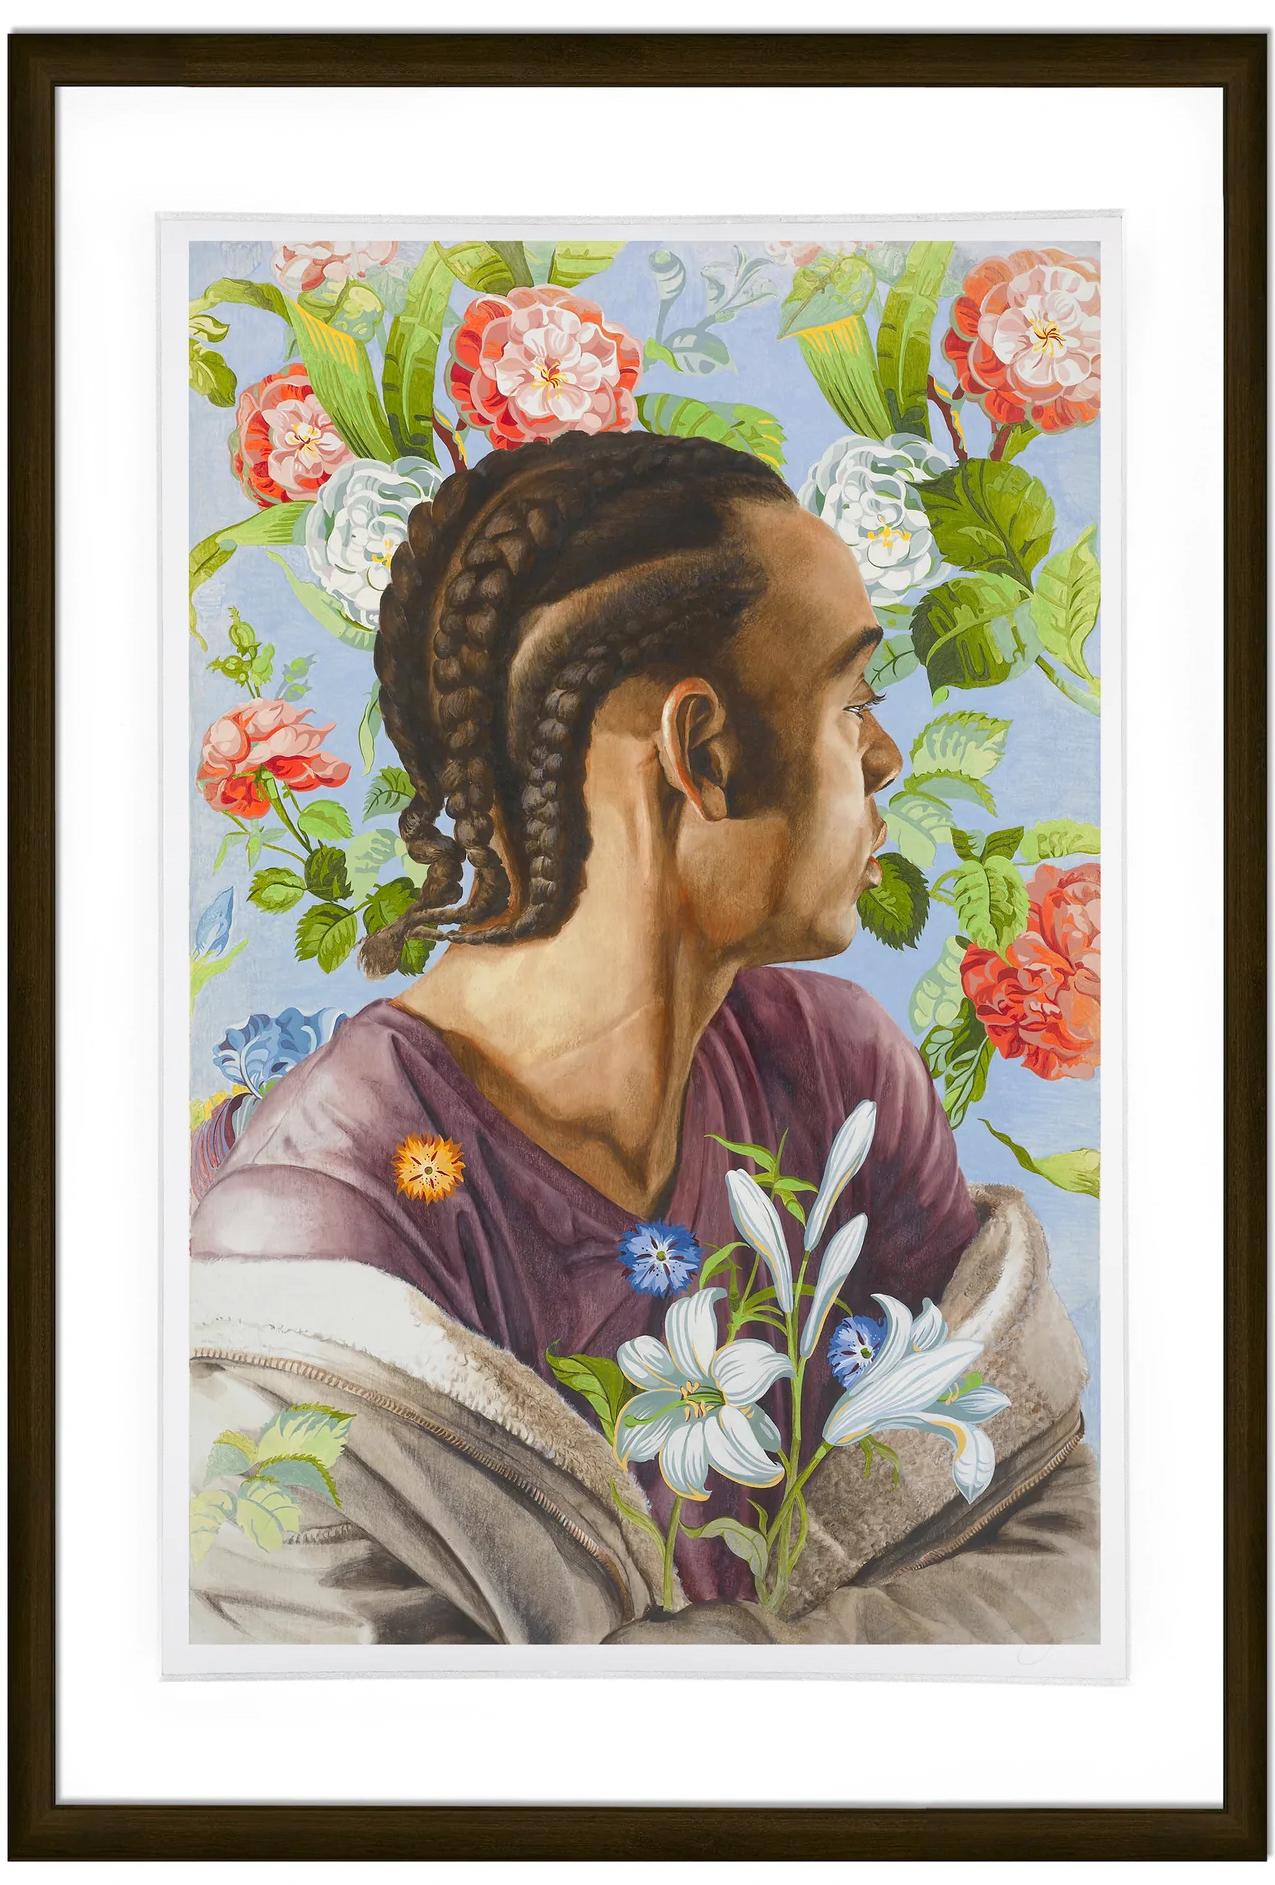 What is Kehinde Wiley’s most famous portrait?